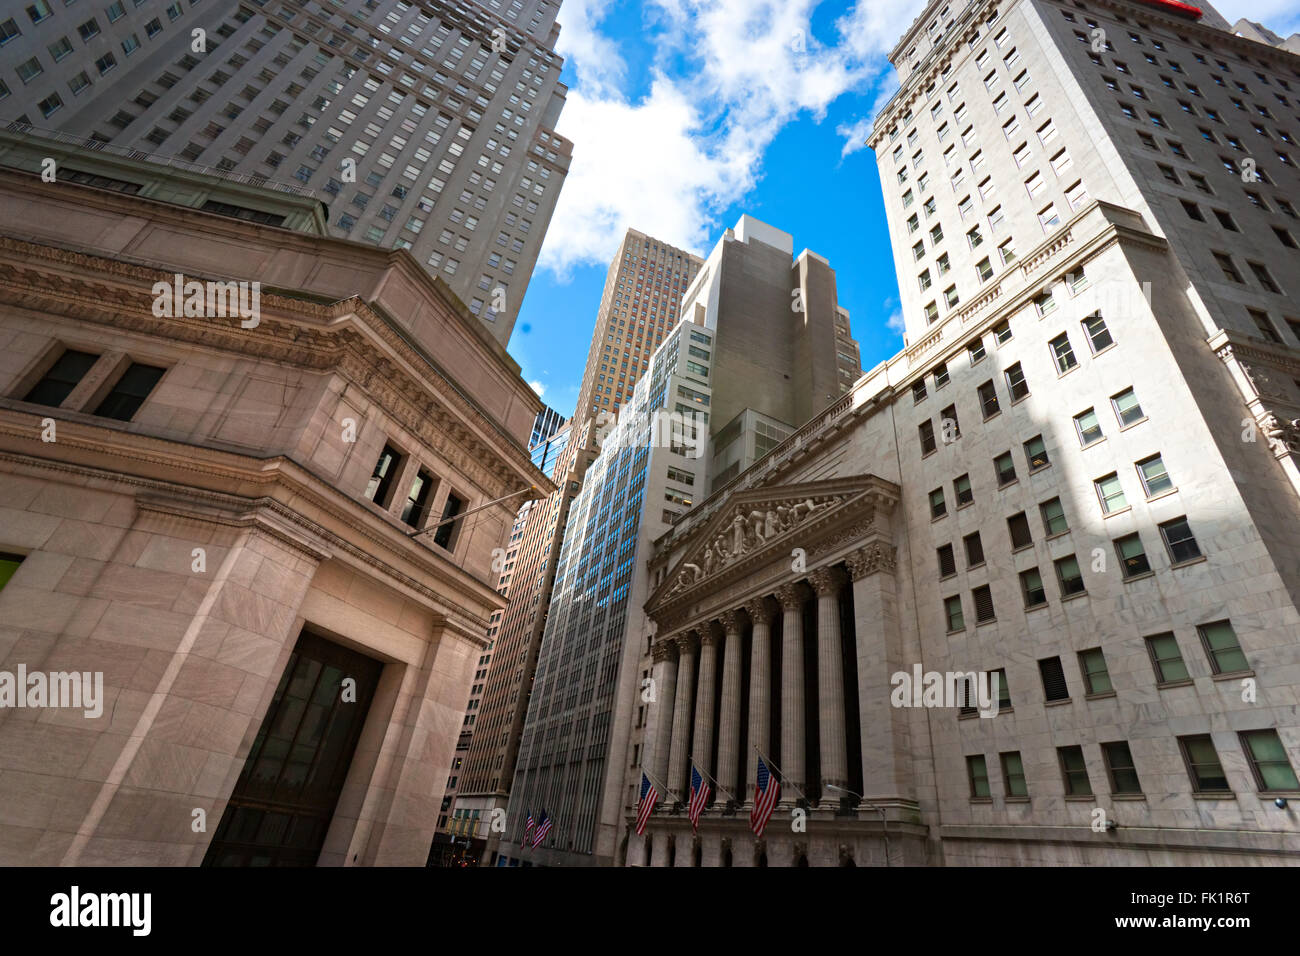 NEW YORK CITY - MARCH 30: The historic New York Stock Exchange is the largest stock exchange in the world March 30, 2010 in New  Stock Photo